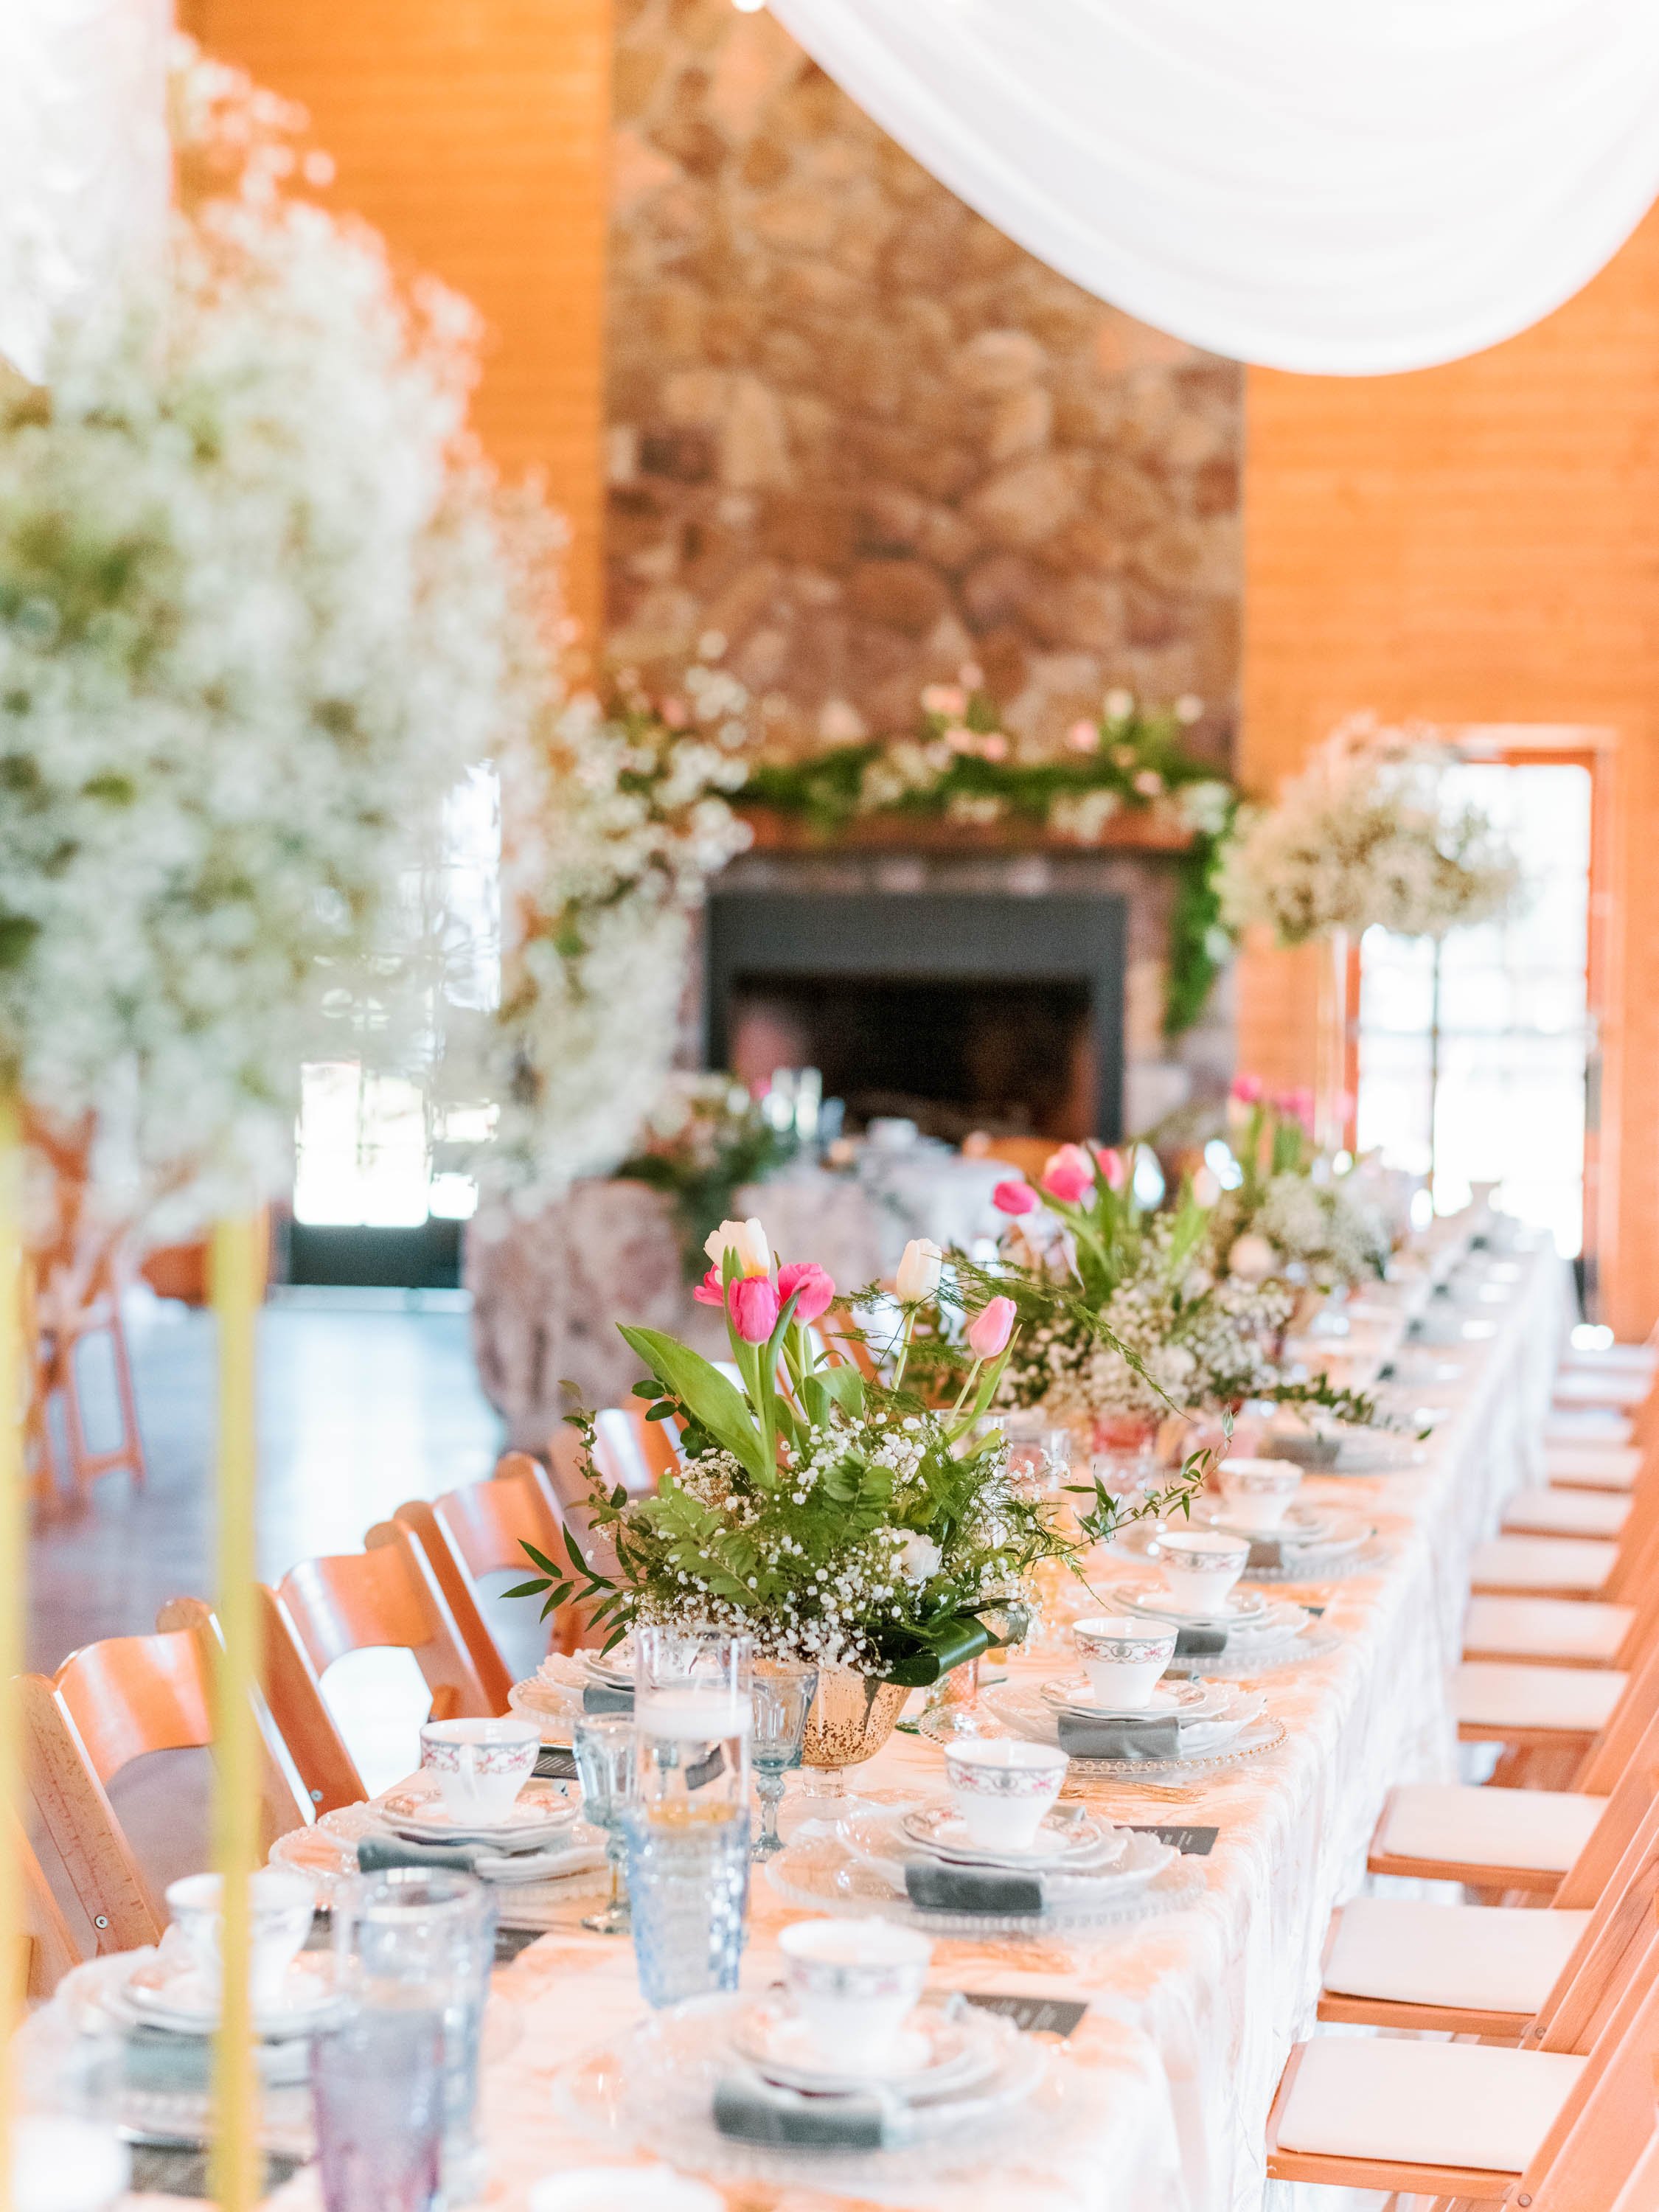  A vibrant spring tablescape at Oakland Farm wedding venue near Raleigh, North Carolina. The table is covered in white linens, vintage place settings with teacups, and is lined with center pieces of pink tulips, ferns, and babies breath. There is a s